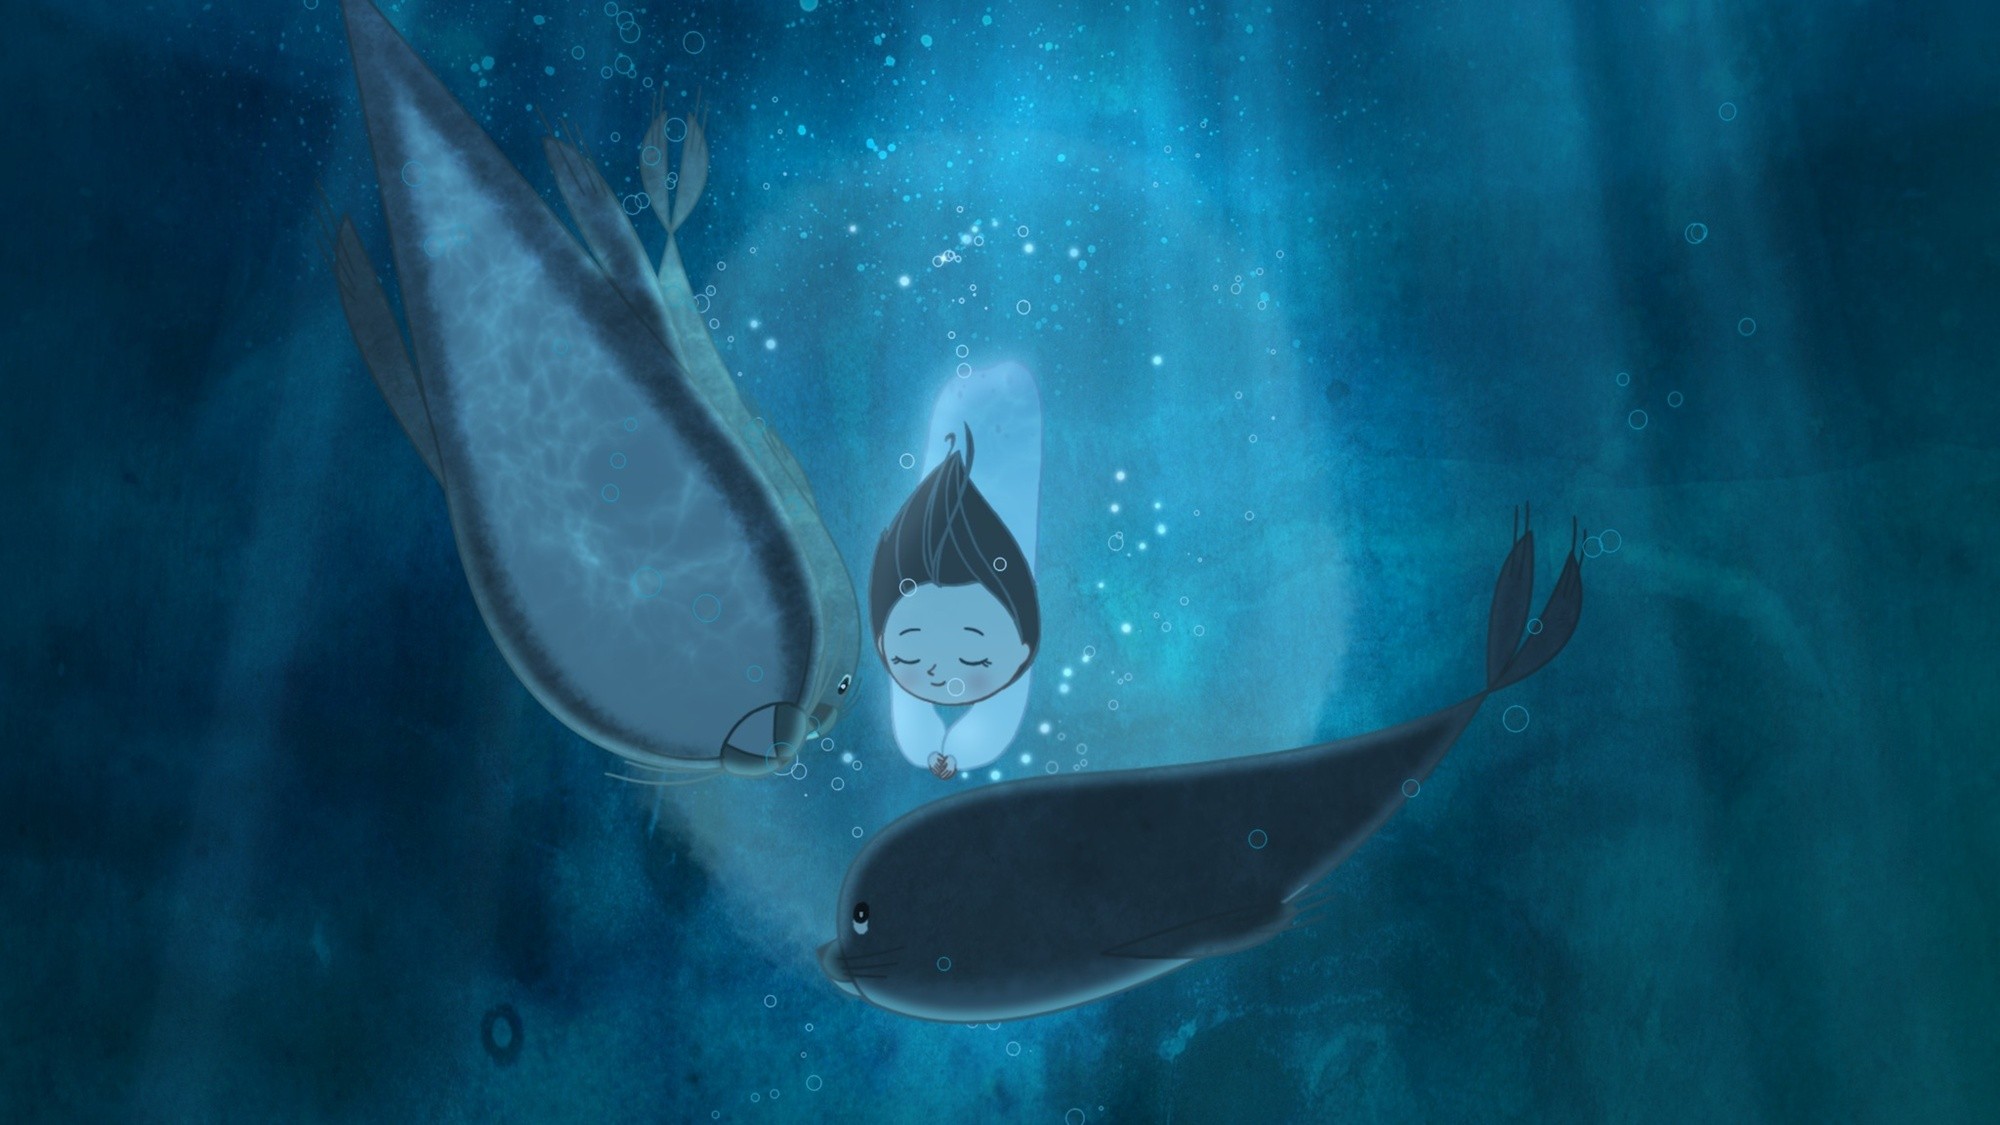 A scene of GKIDS' Song of the Sea (2014)